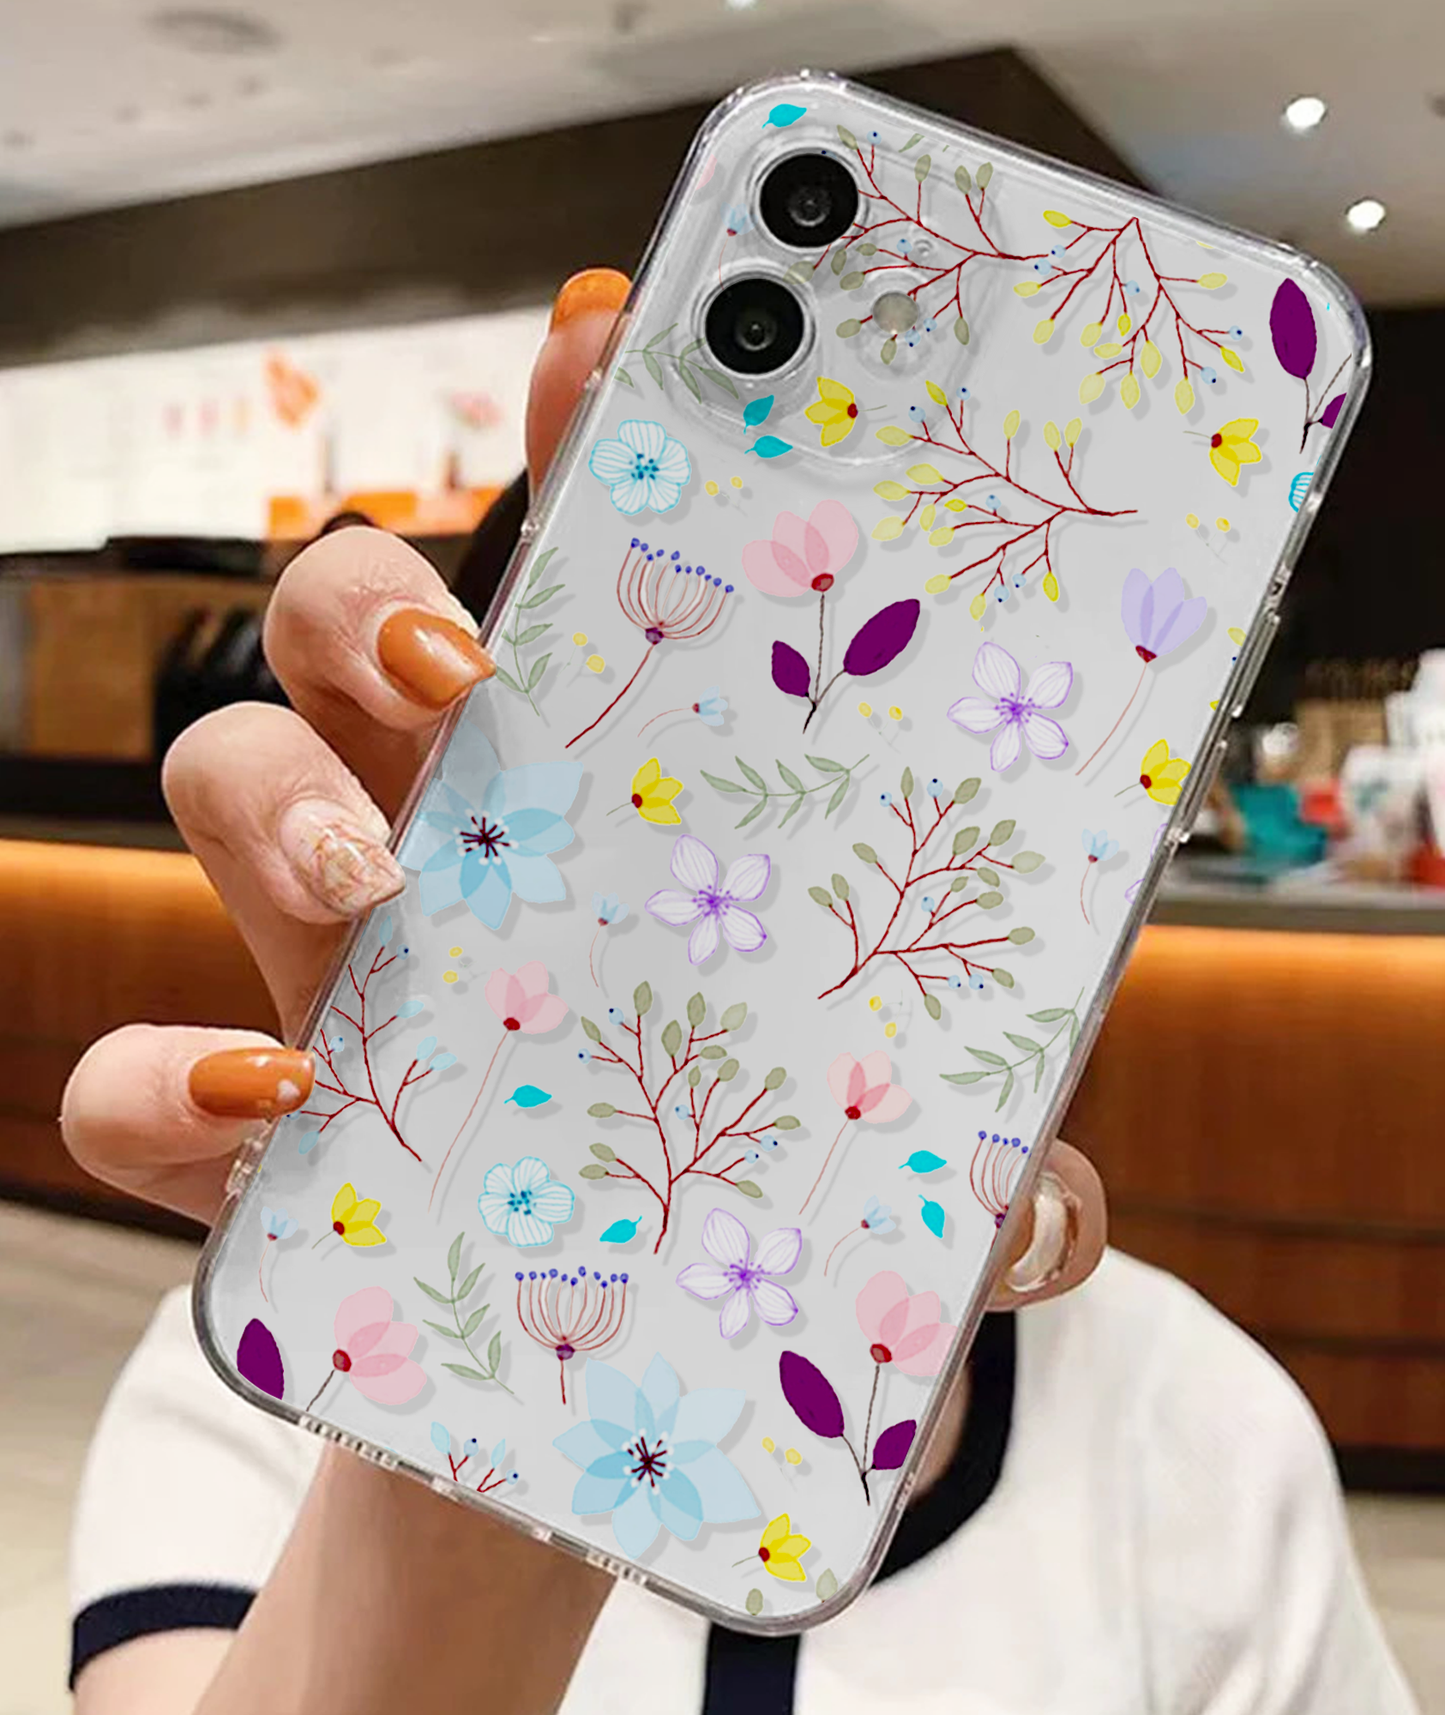 Lovely Floral Family Design Clear Silicon Case Cover